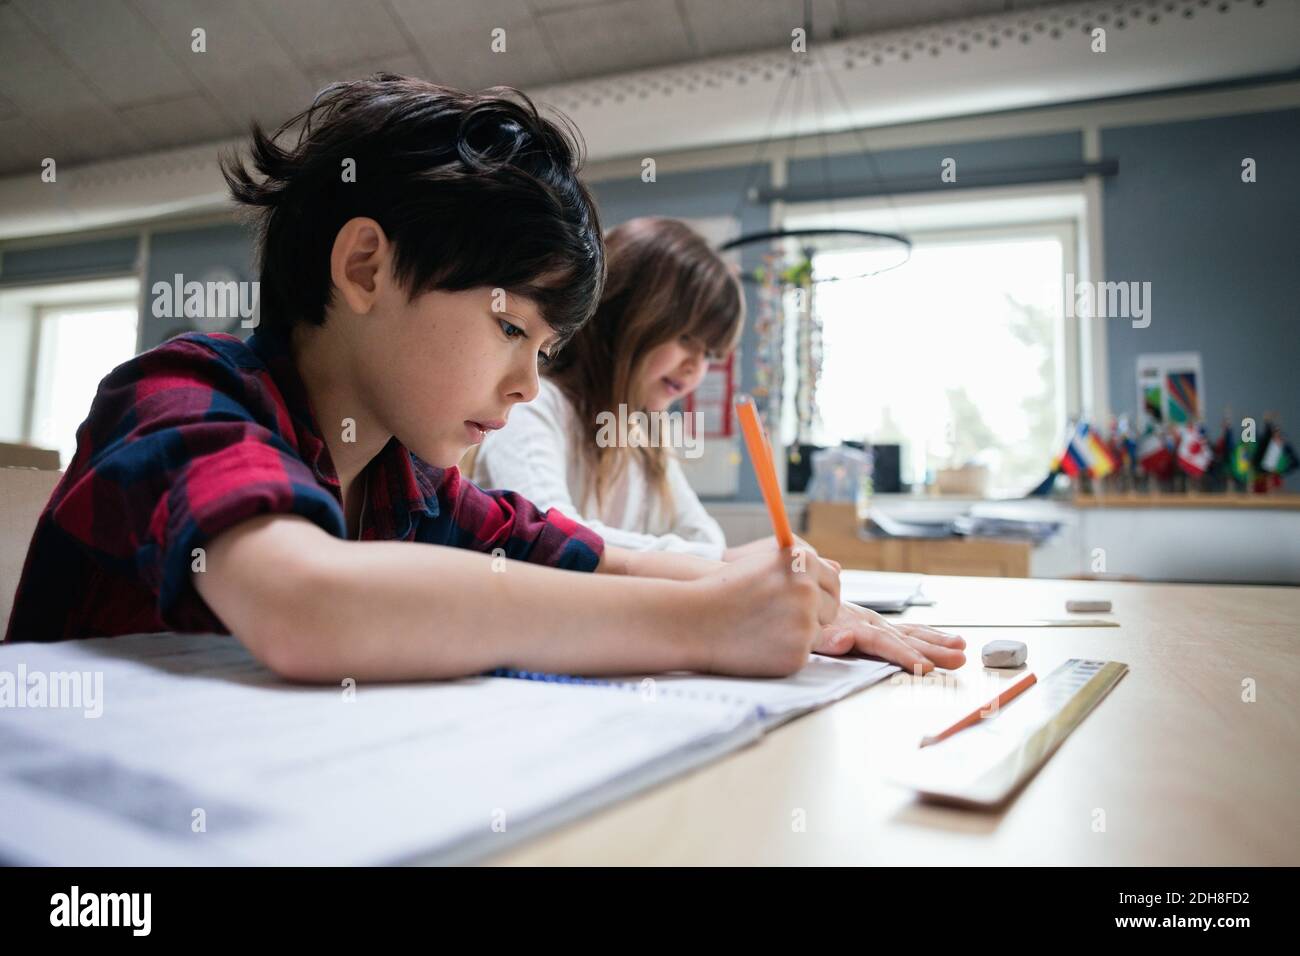 Serious students studying at desk in classroom Stock Photo